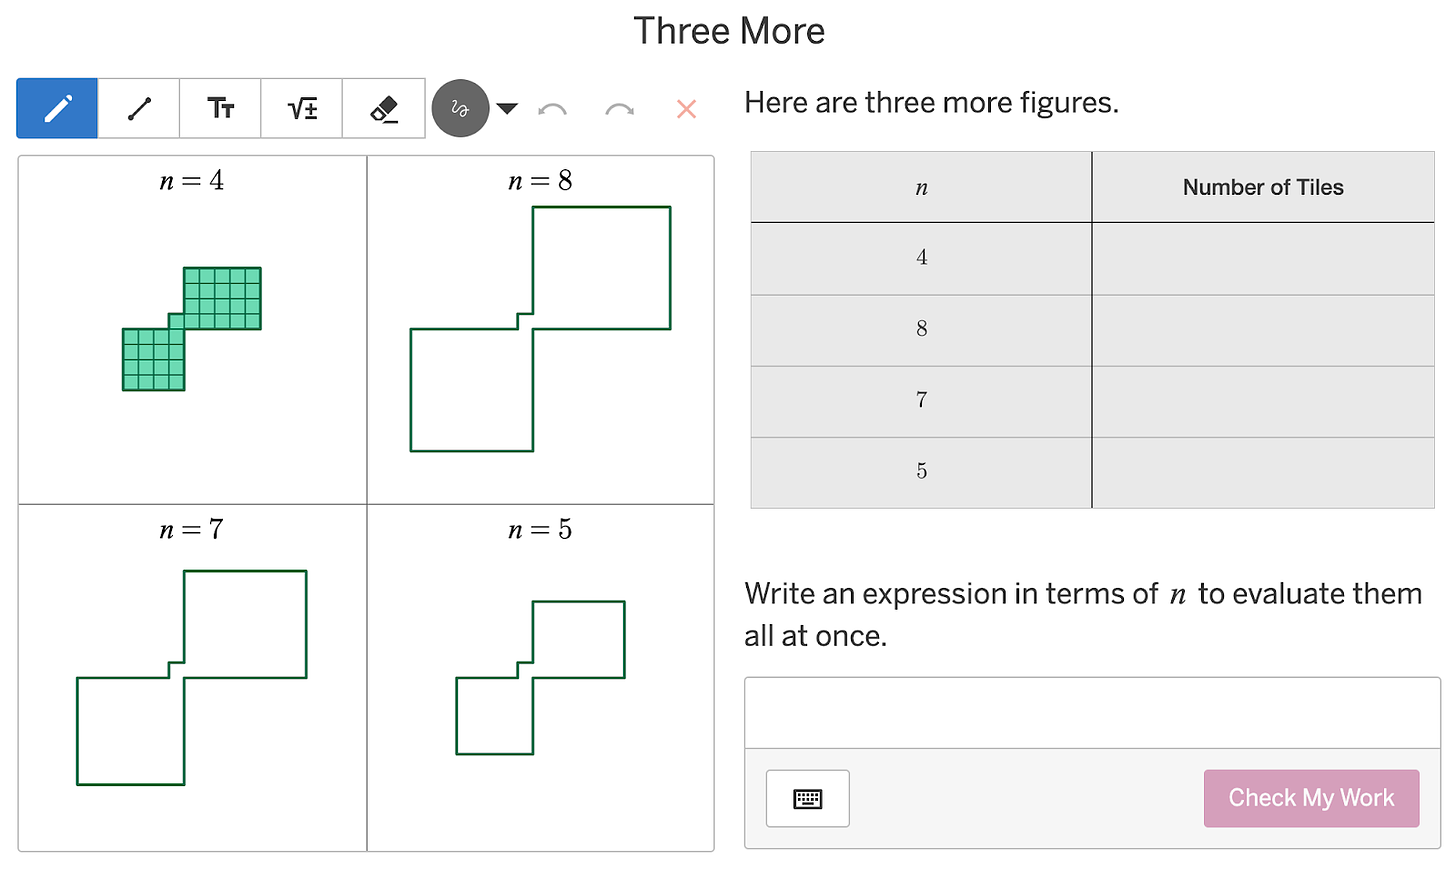 A math problem asking students to write an expression for a pattern in terms of "n".